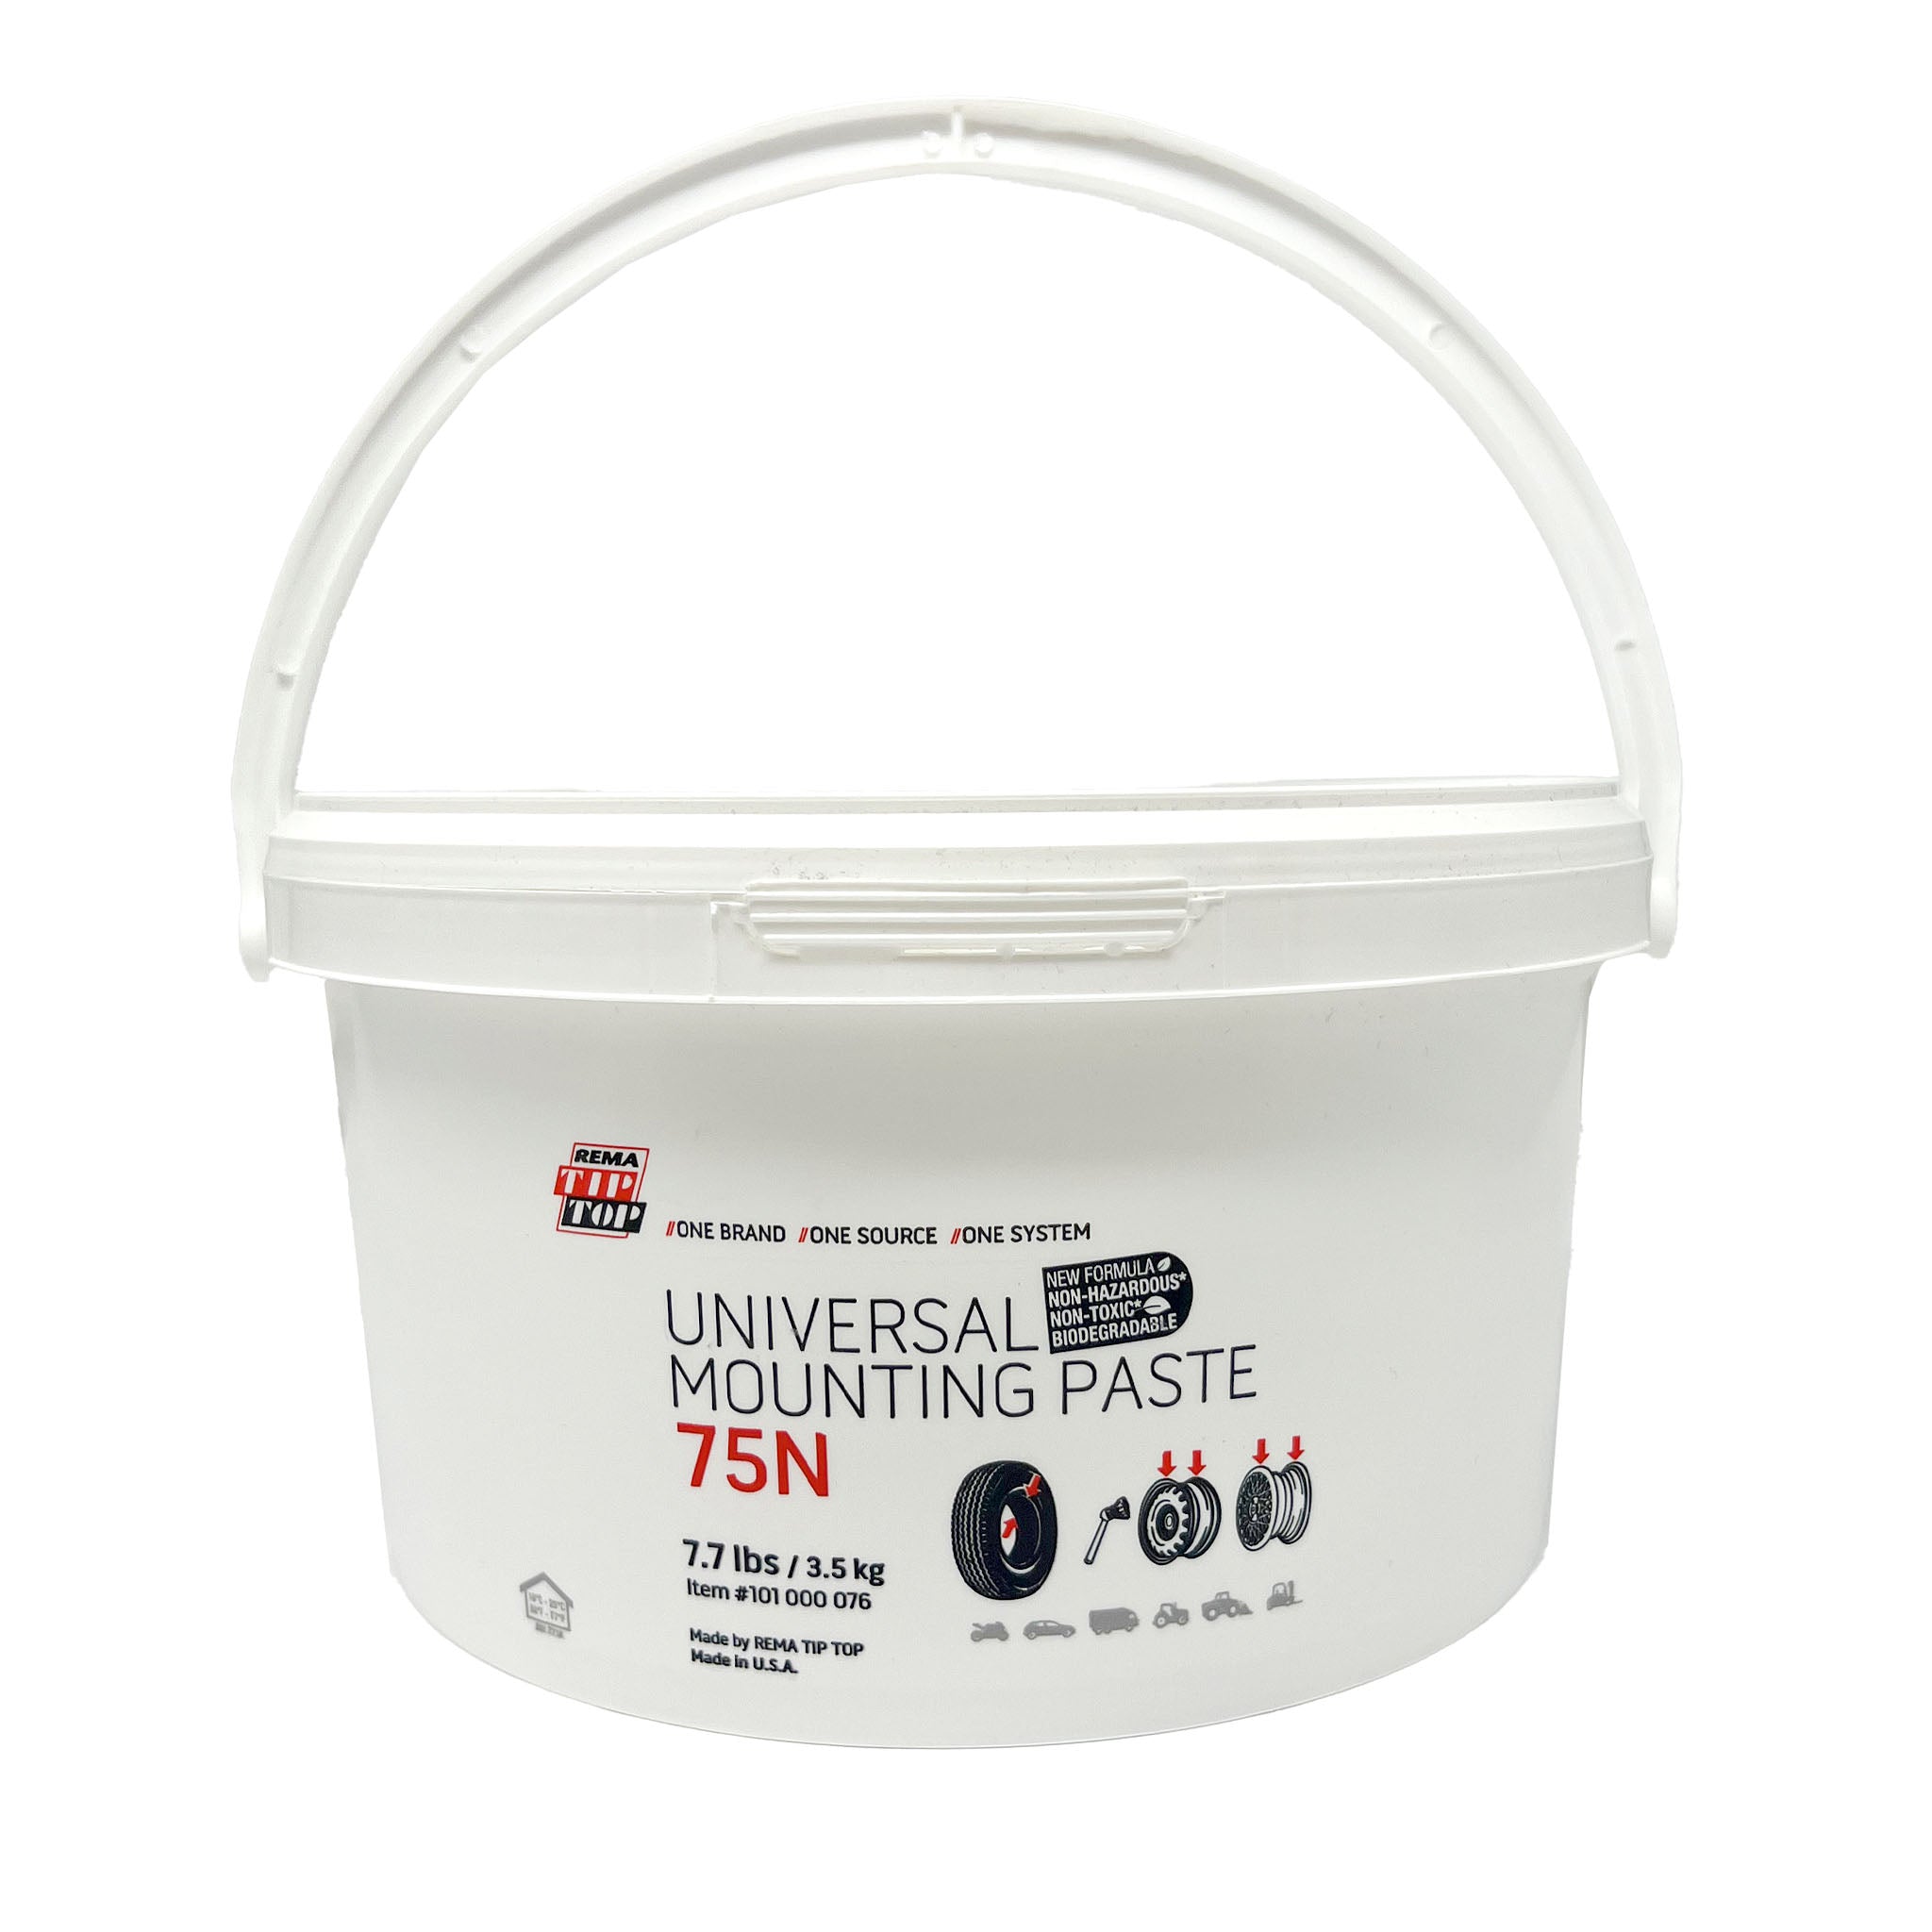 Rema 75N Tire Mounting Paste - Low Profile Bucket - 7.75 lb